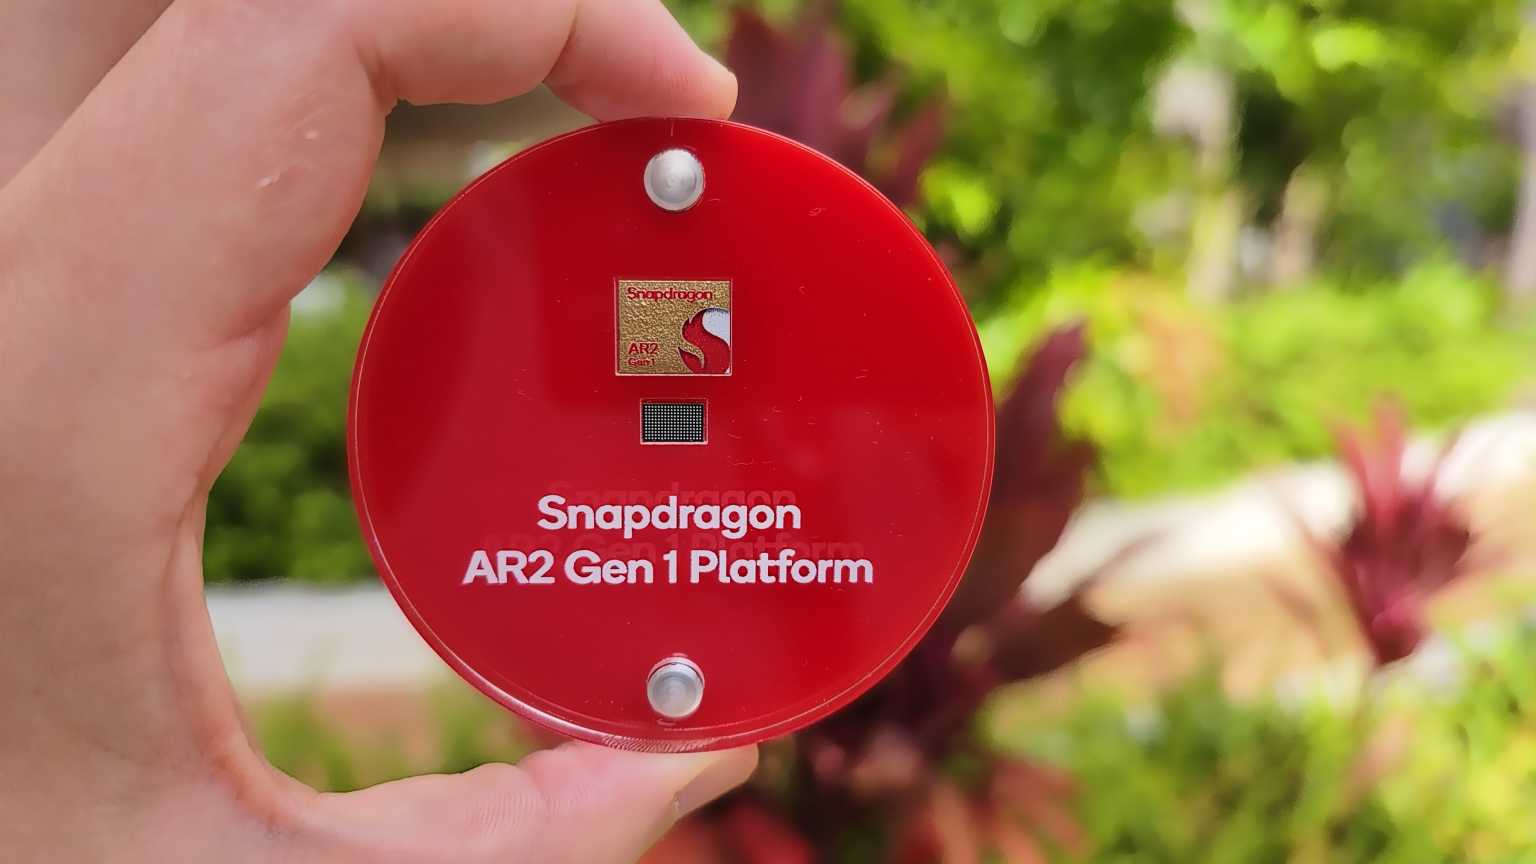 Snapdragon AR2 Gen 1 is Qualcomm’s first chip designed for augmented reality